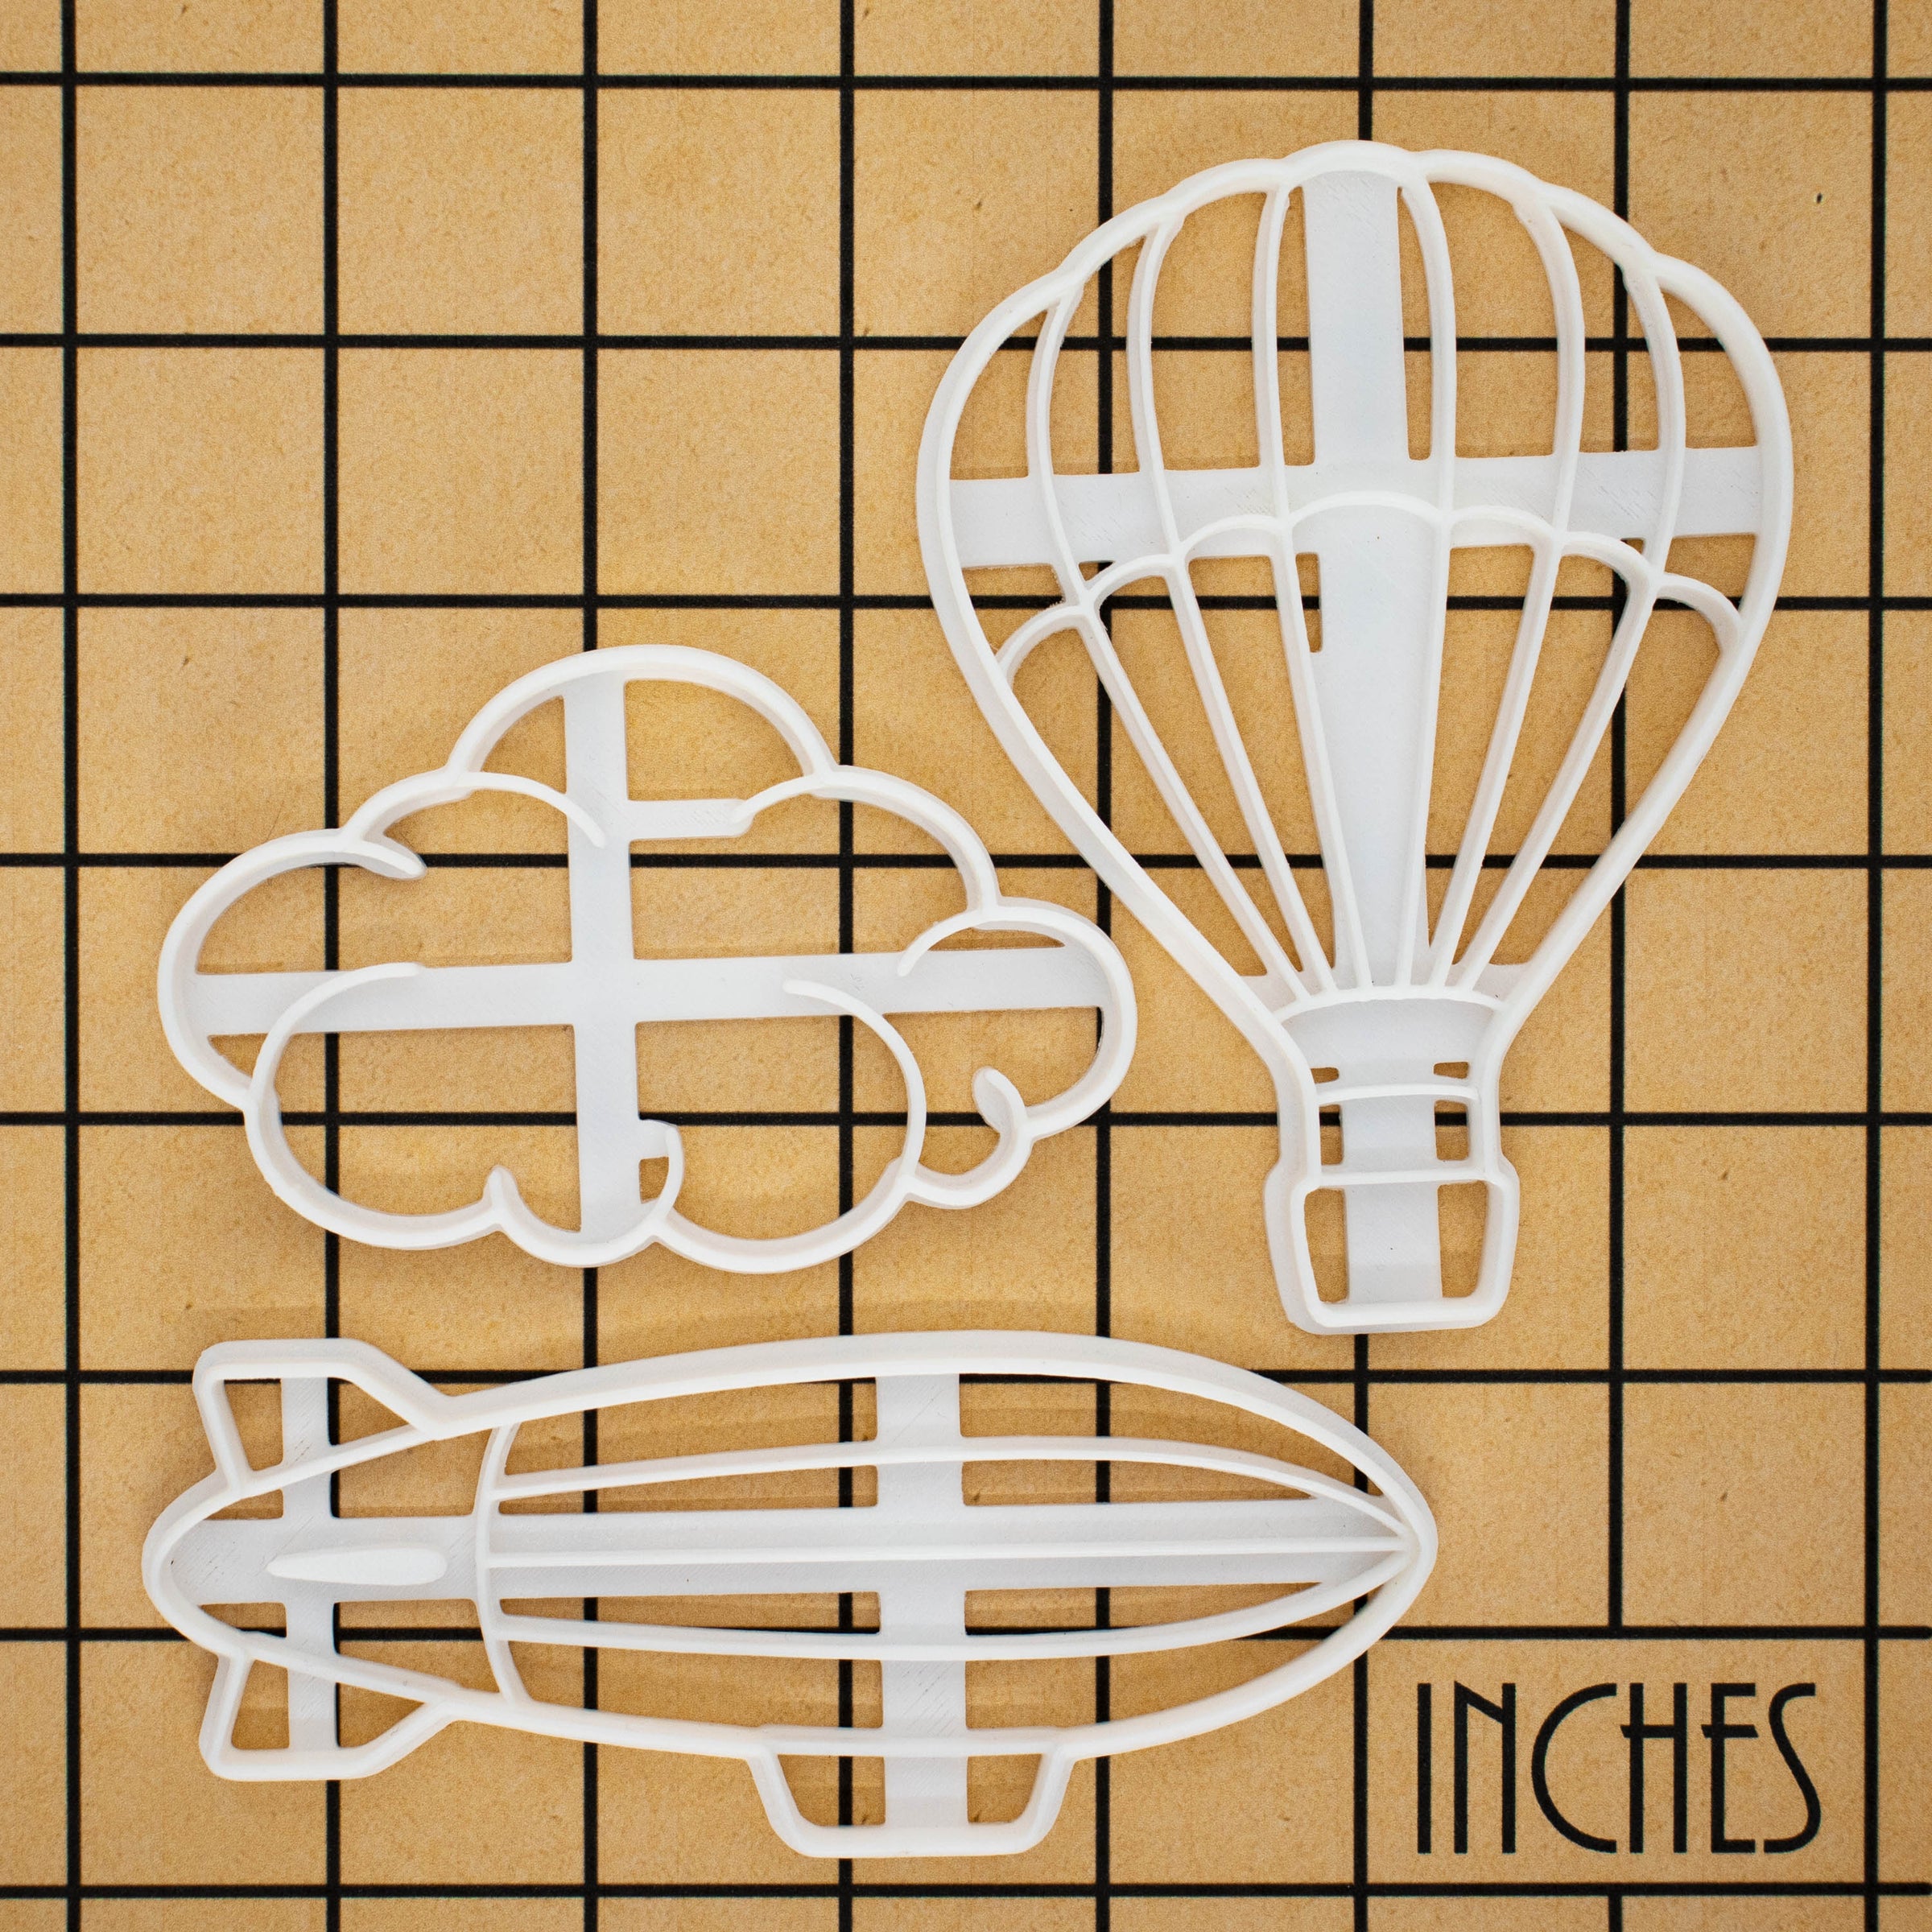 Set of 3 Cookie cutters - Hot Air Balloon, Cloud, and Blimp